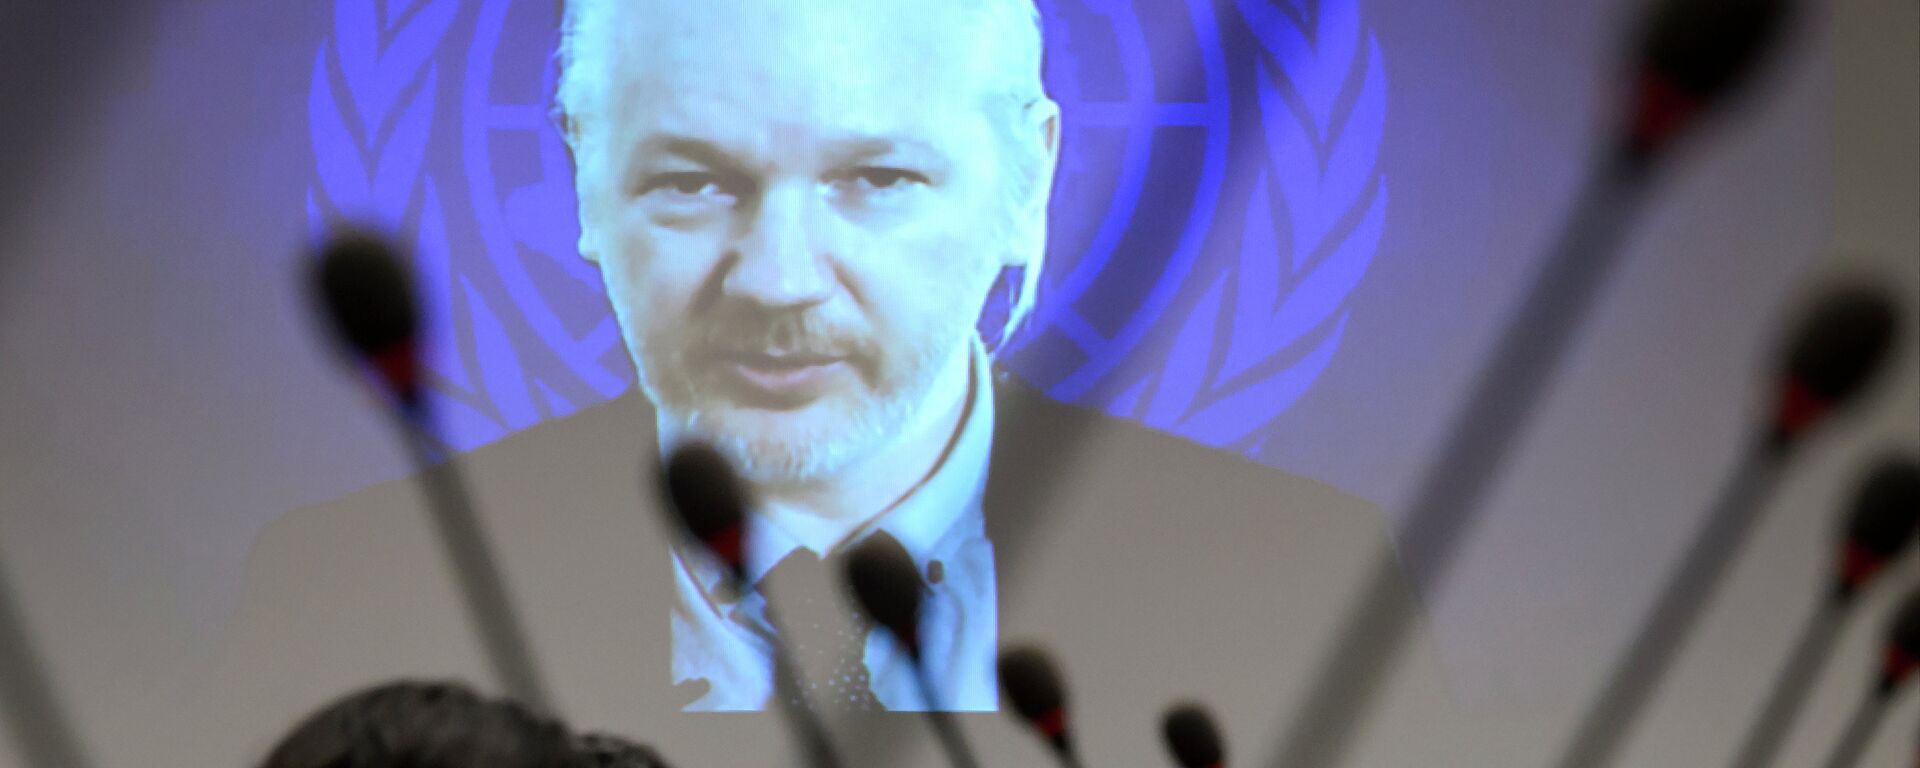 WikiLeaks founder Julian Assange is seen on a screen speaking via web cast from the Ecuadorian Embassy in London during an event on the sideline of the United Nations (UN) Human Rights Council session - Sputnik Mundo, 1920, 11.12.2021